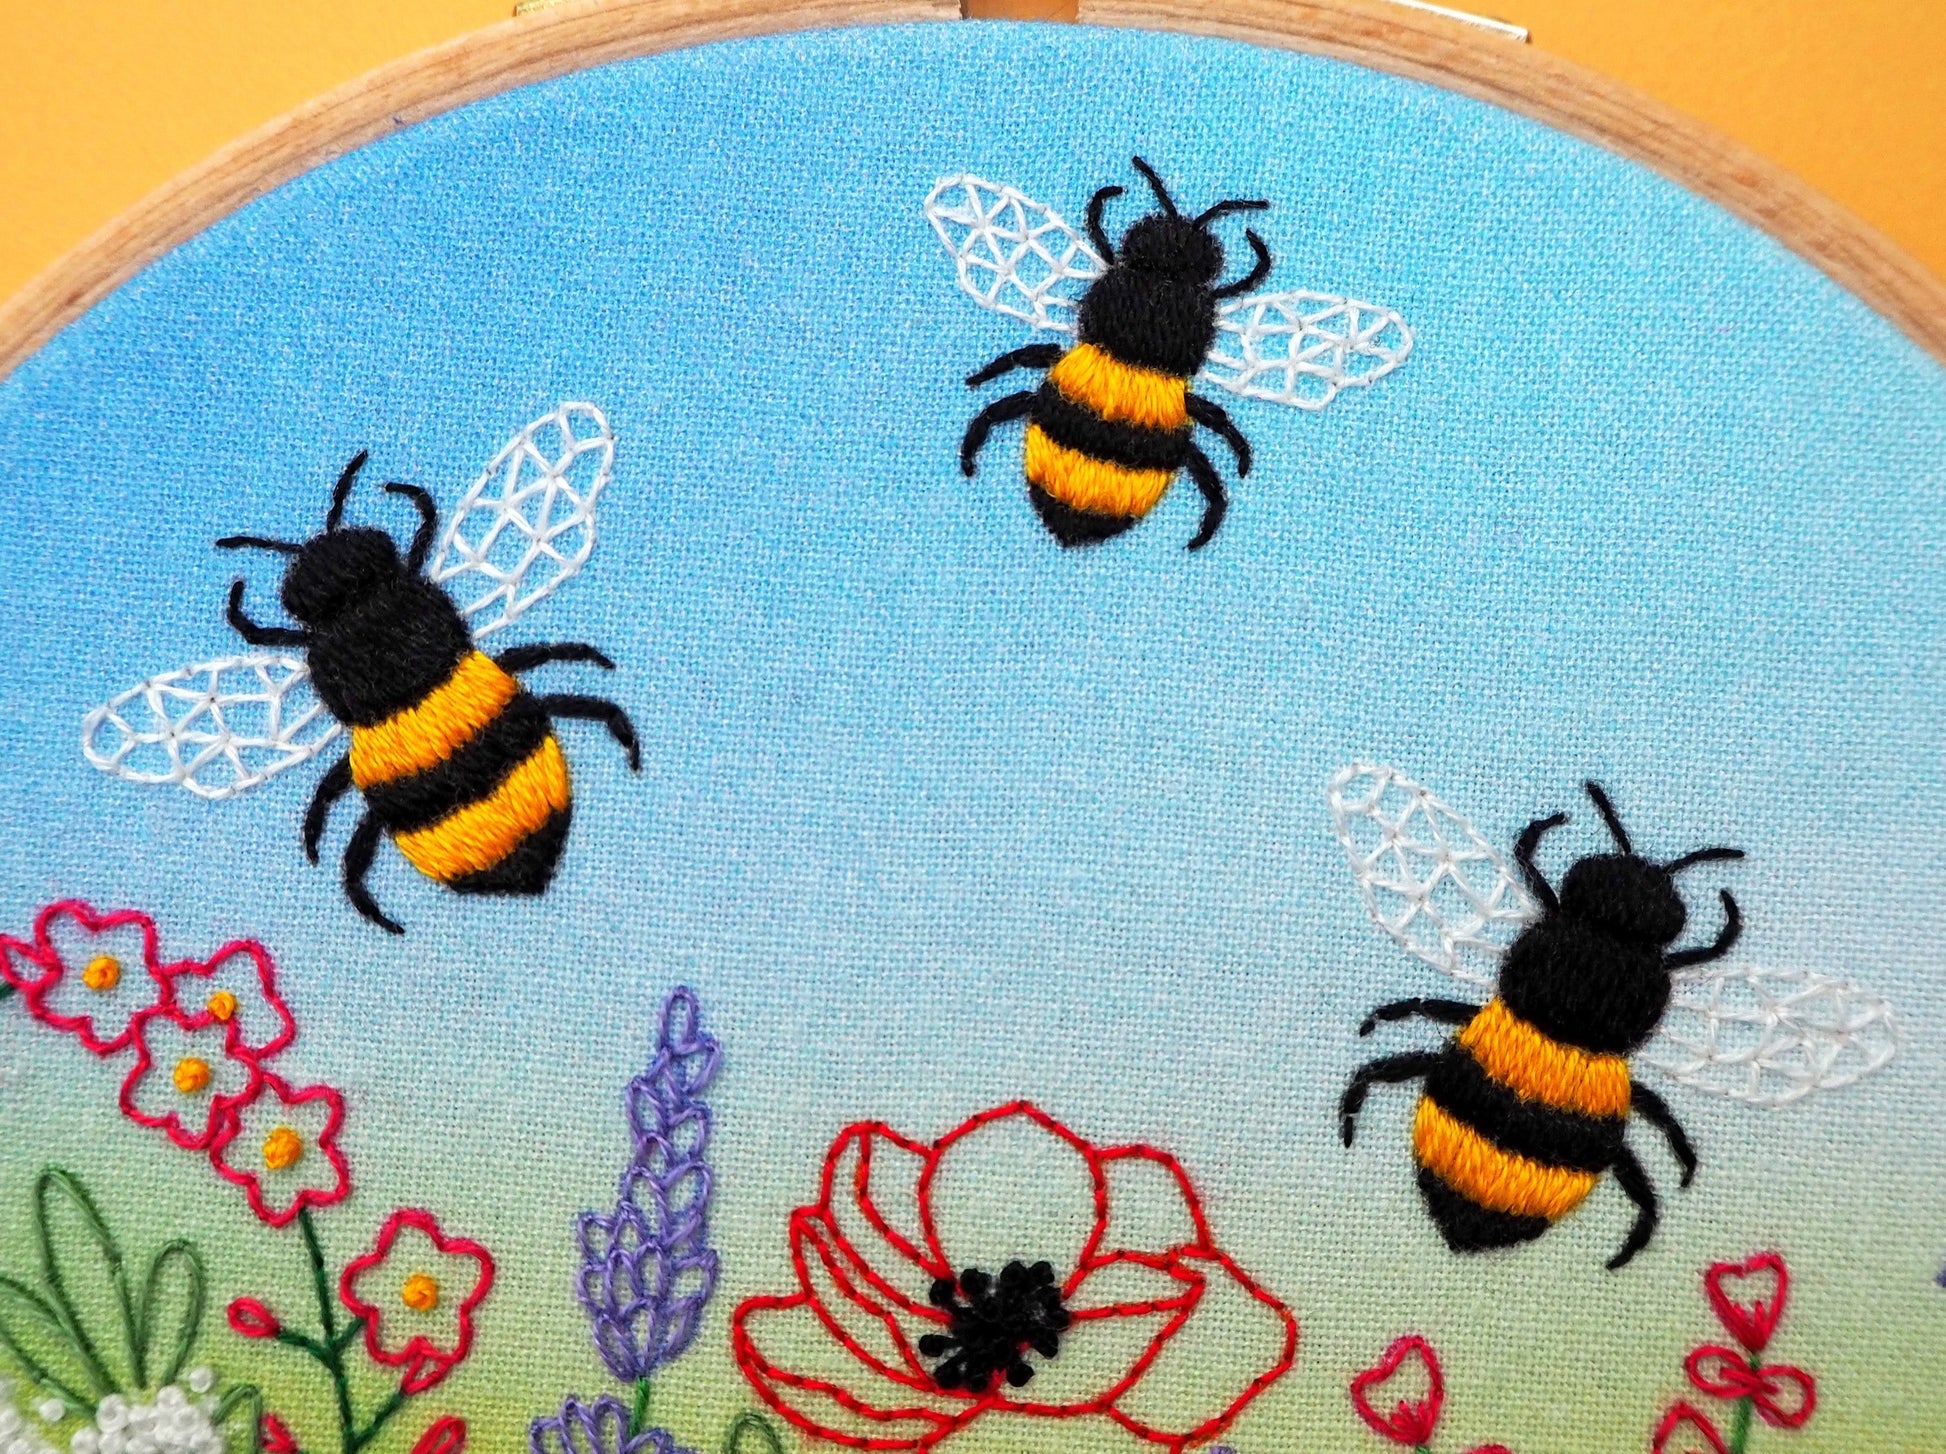 Bees Hand Embroidery Kits, Bees and Wildflowers Embroidery Kits UK